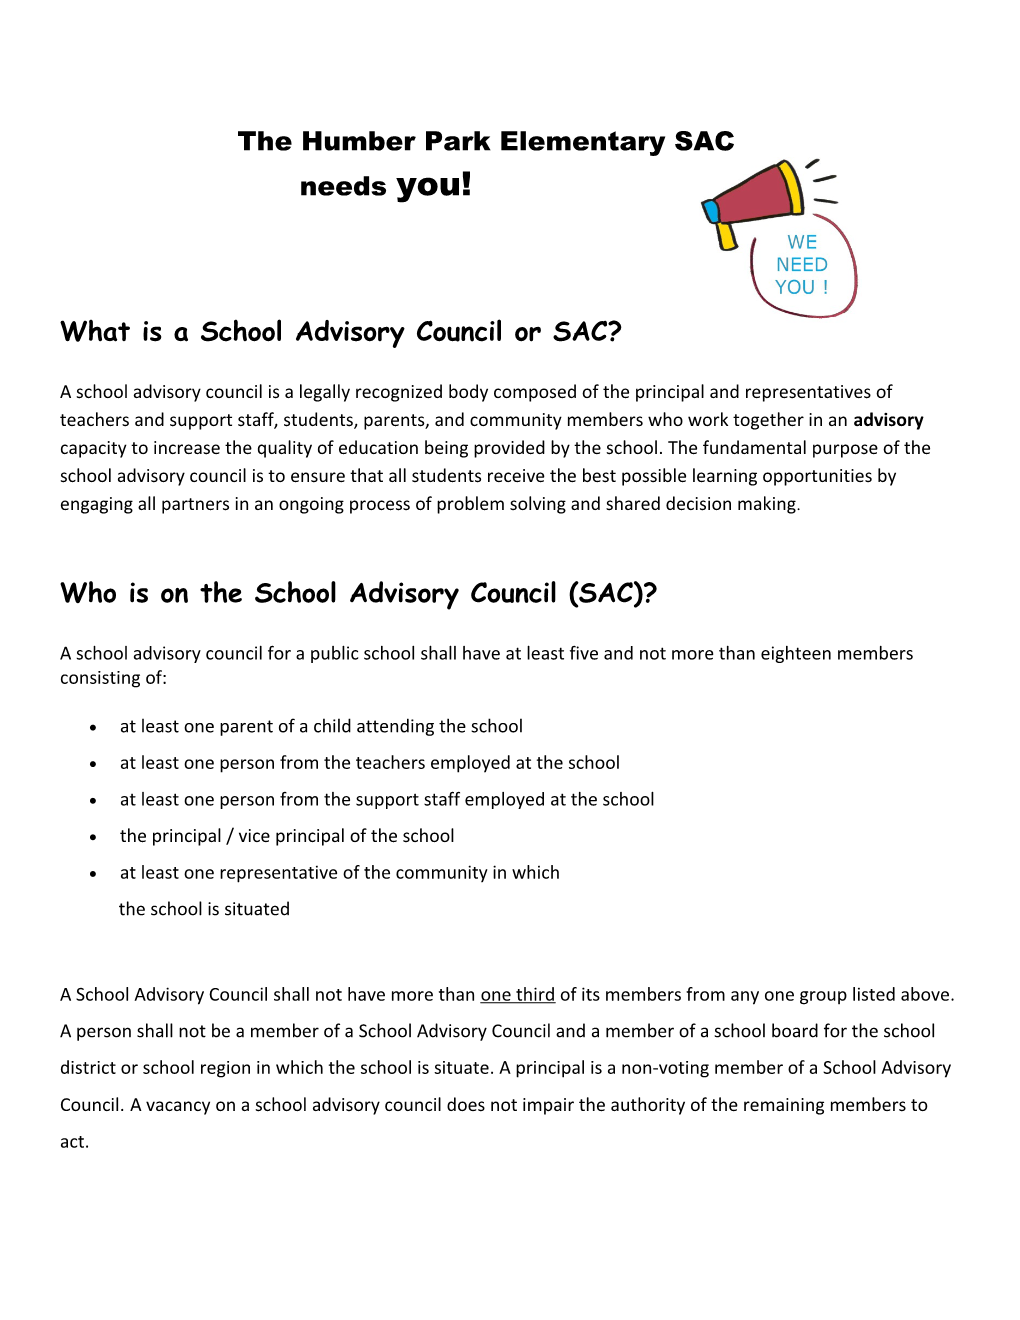 What Is a School Advisory Council Or SAC?